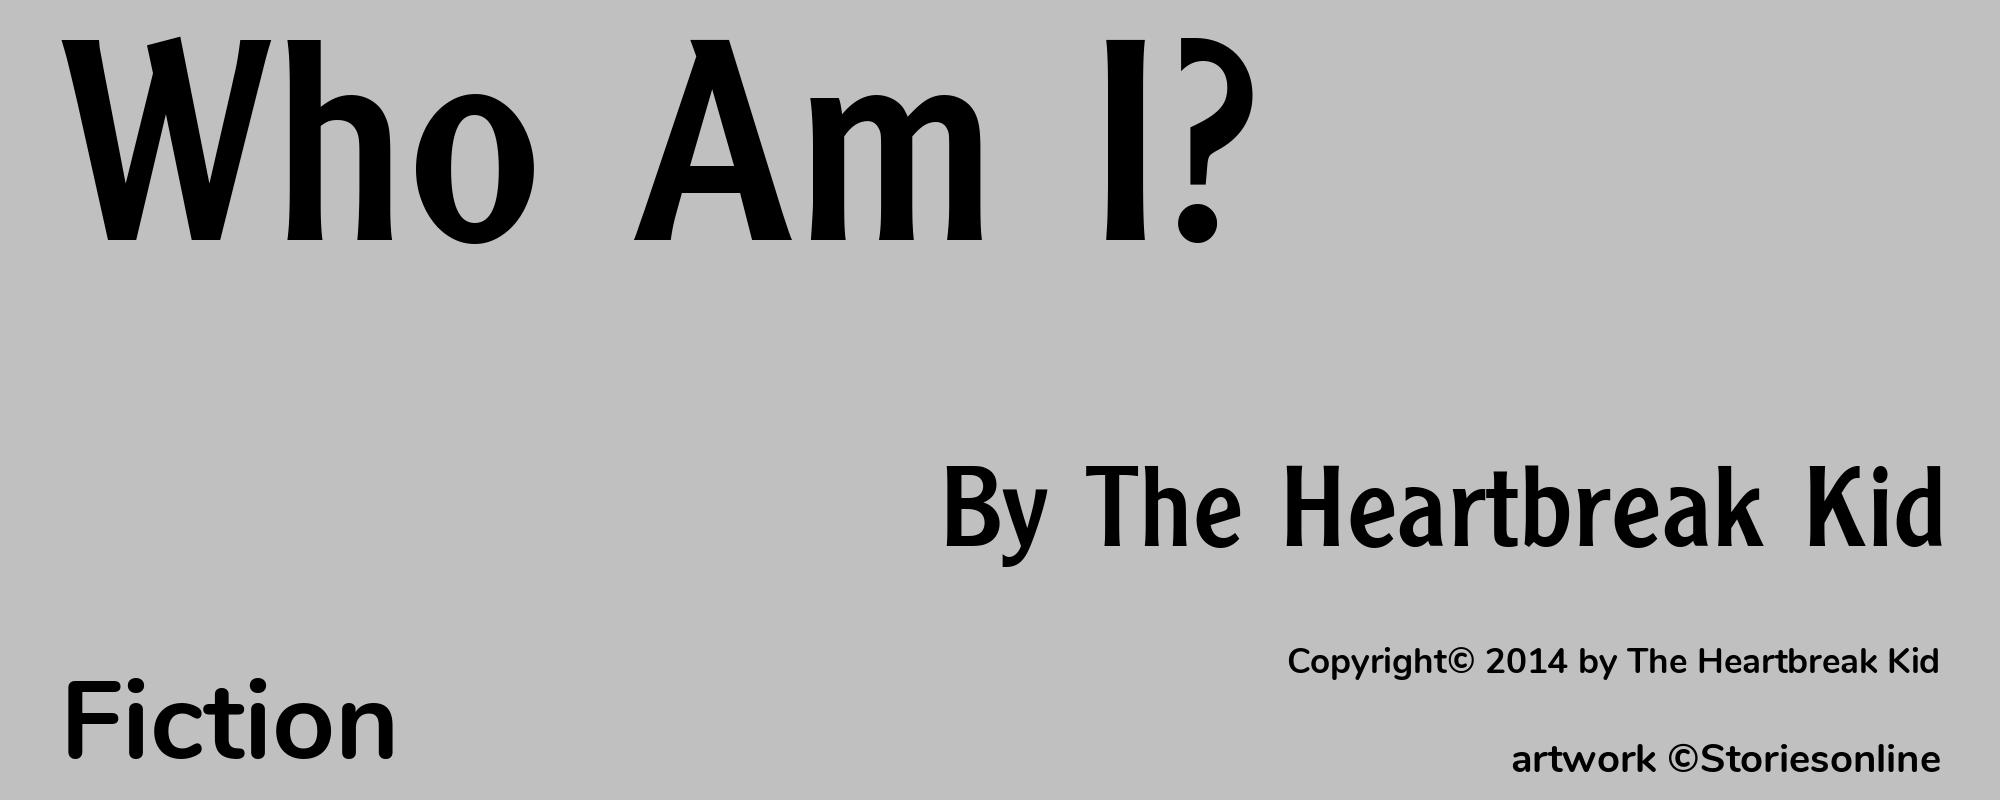 Who Am I? - Cover